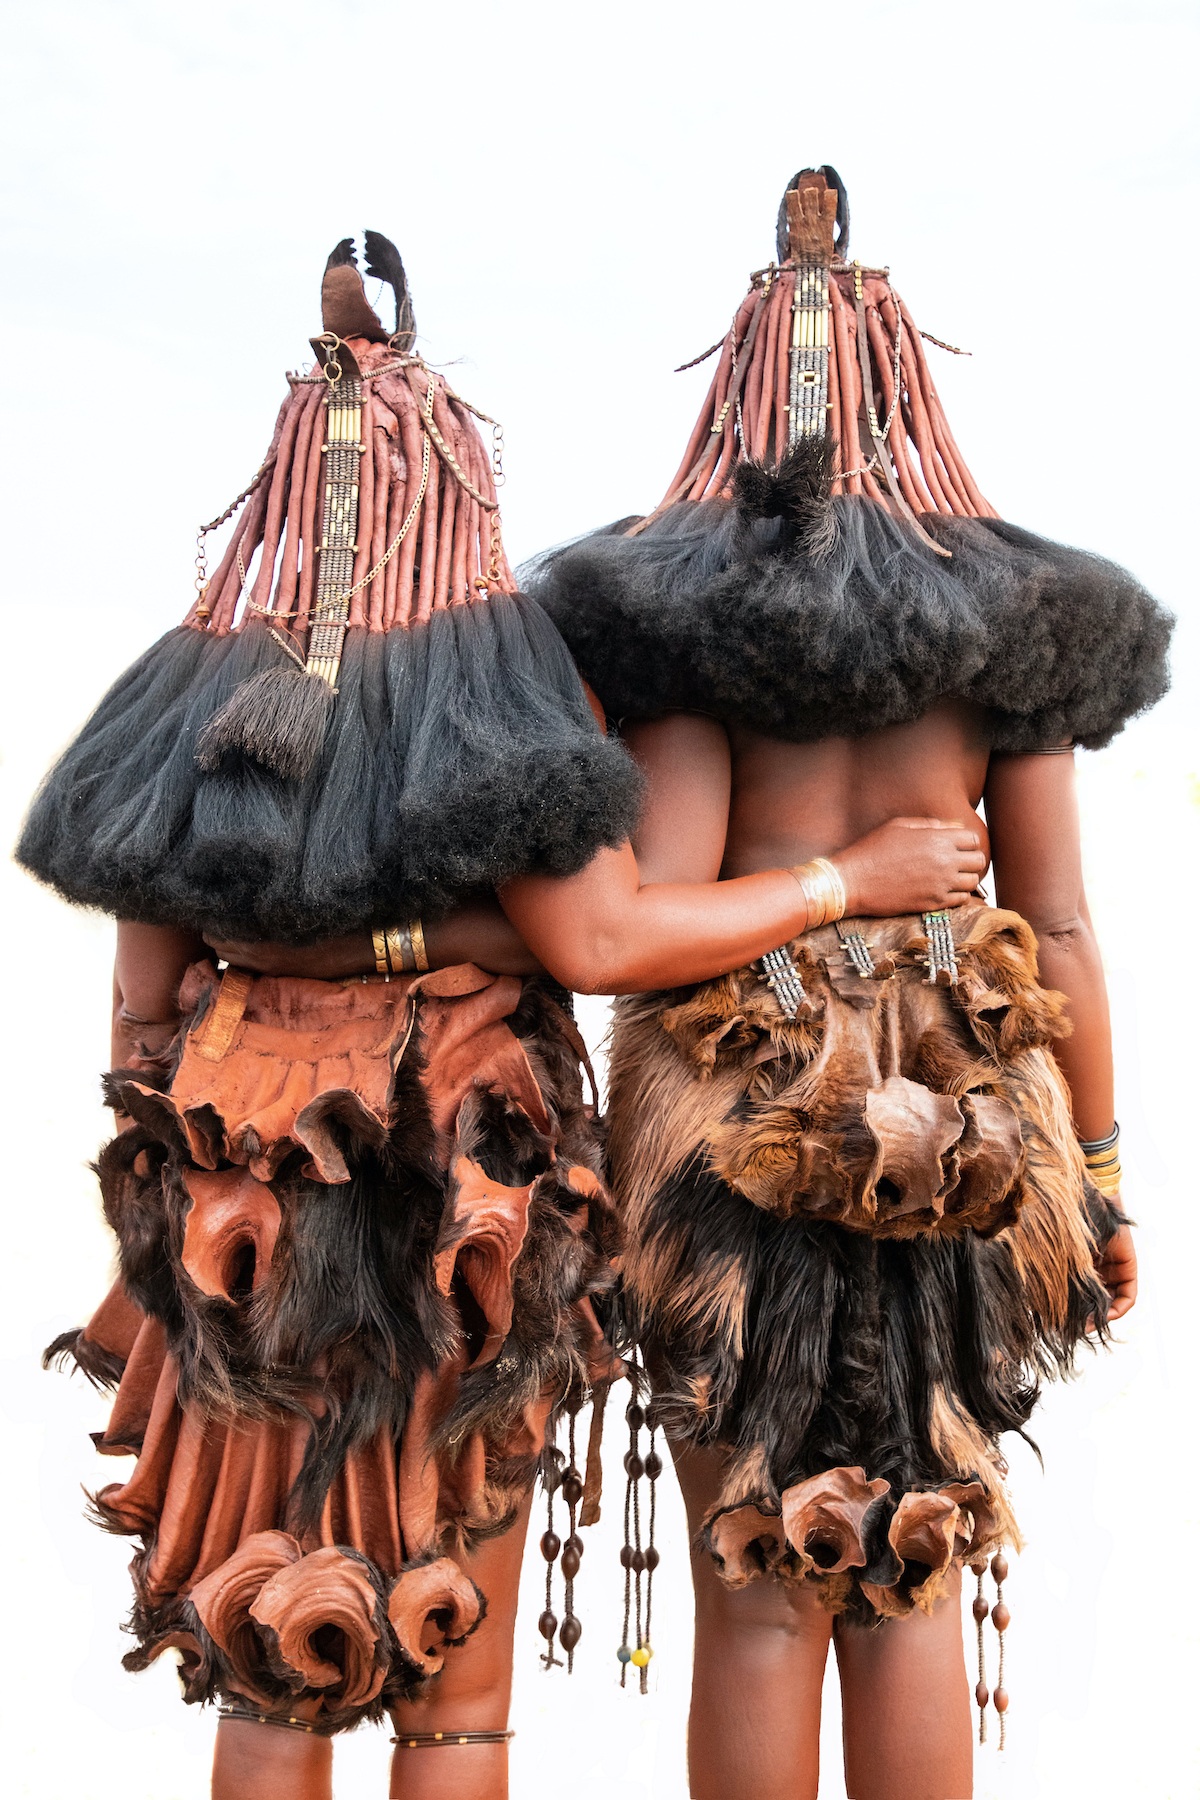 Himba women look as beautiful from behind as they do from the front